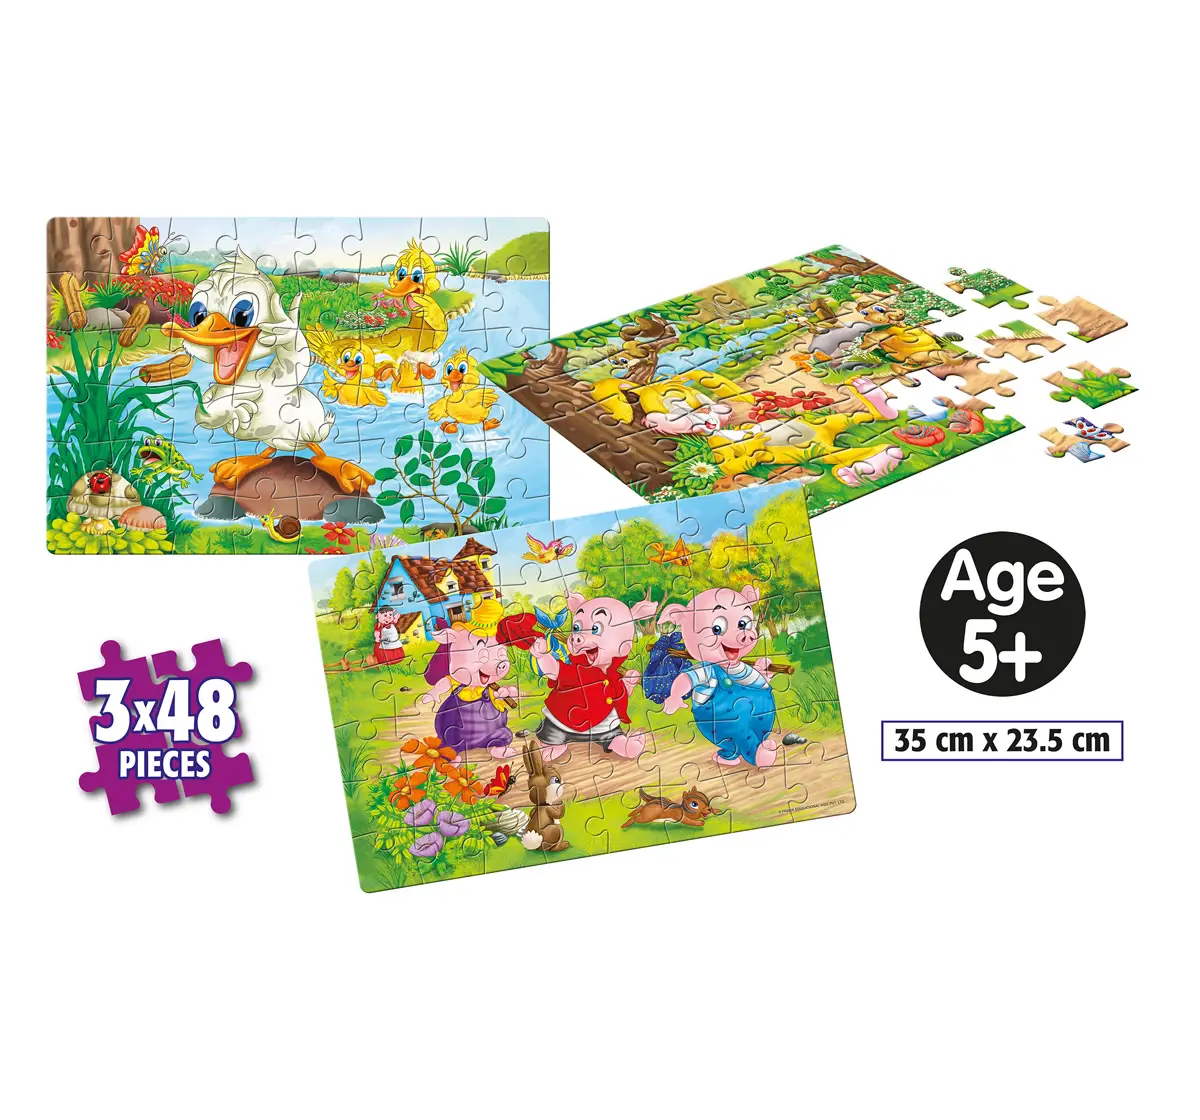 Frank The Hare Little Pigs Ugly Duckling Floor Puzzles Multicolor 5Y+